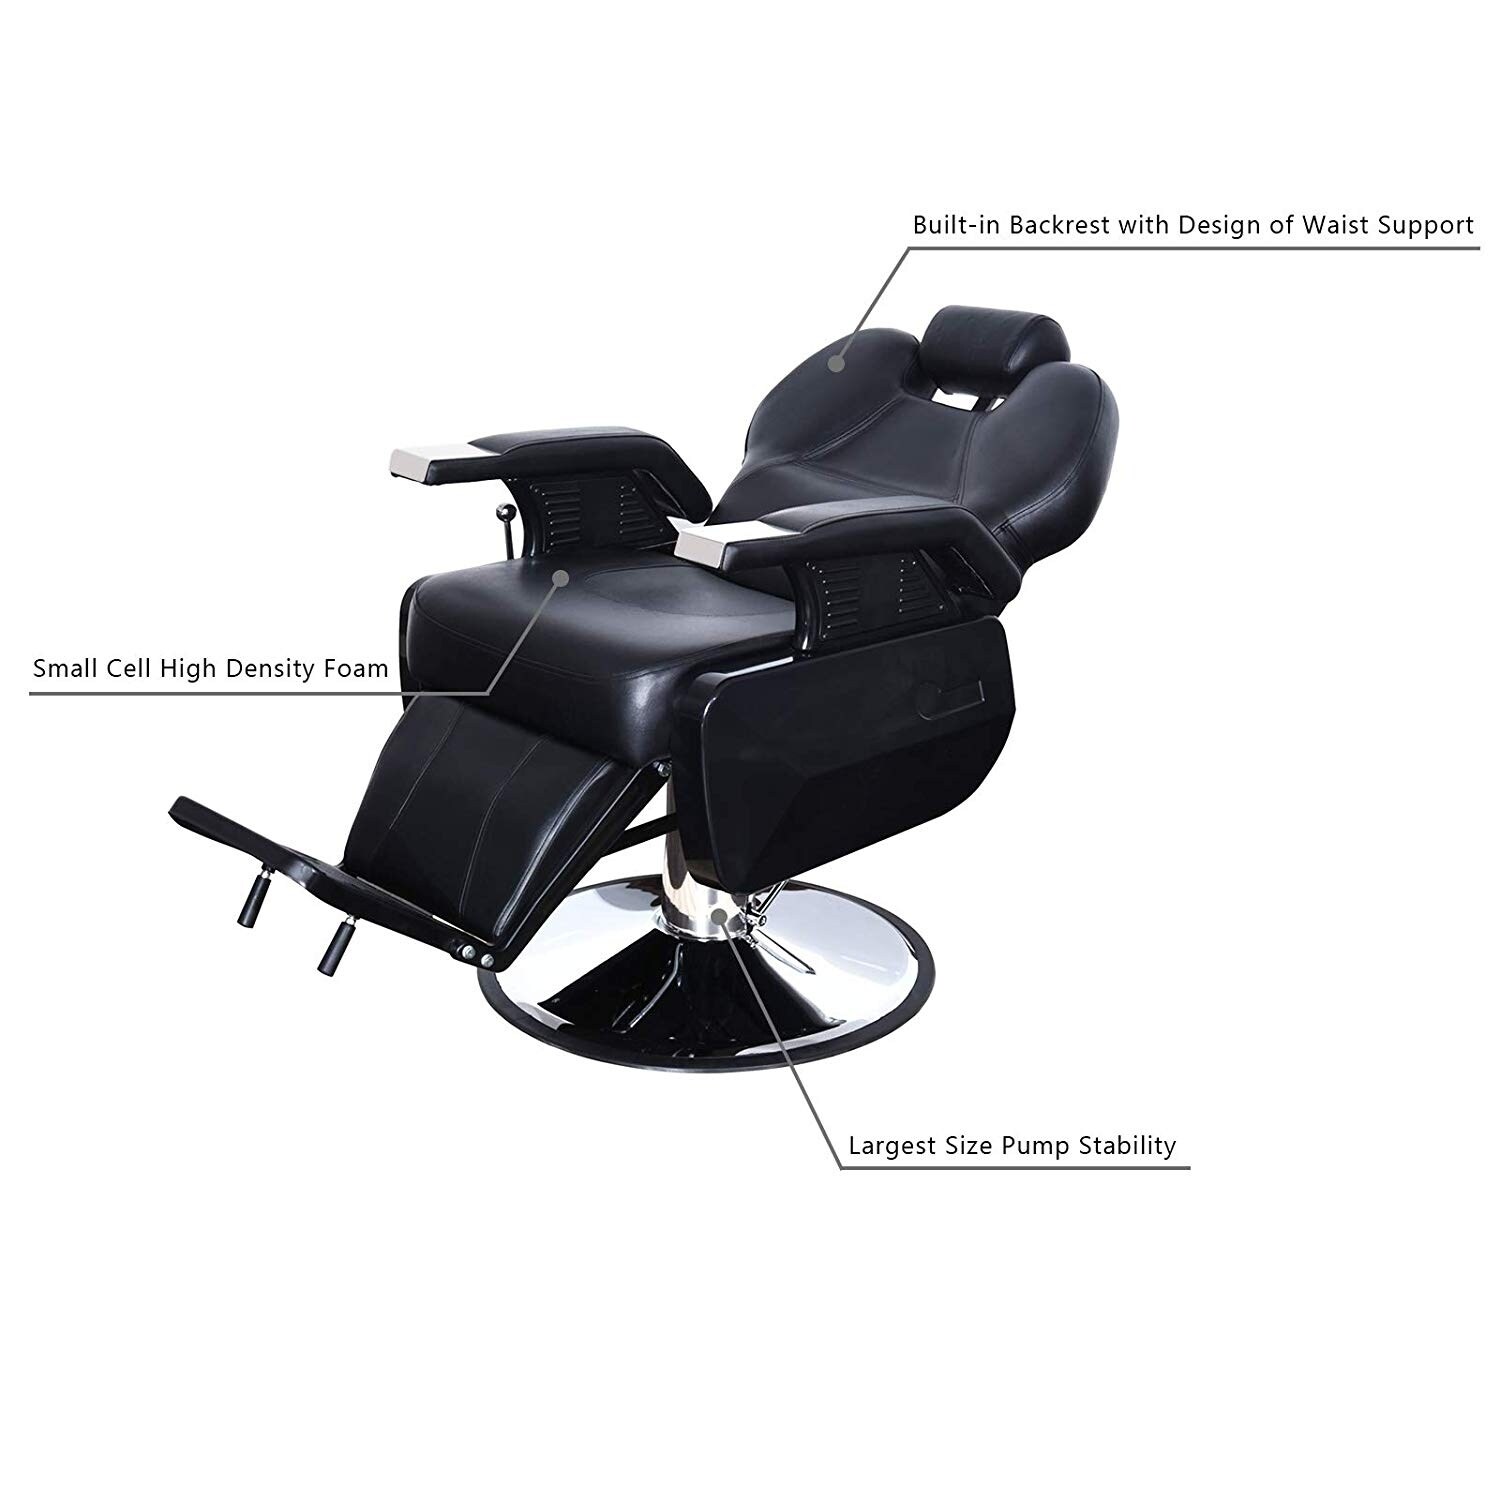 Barberpub Deluxe Hydraulic Recline Black Barber And Salon Chair Overstock 14370682